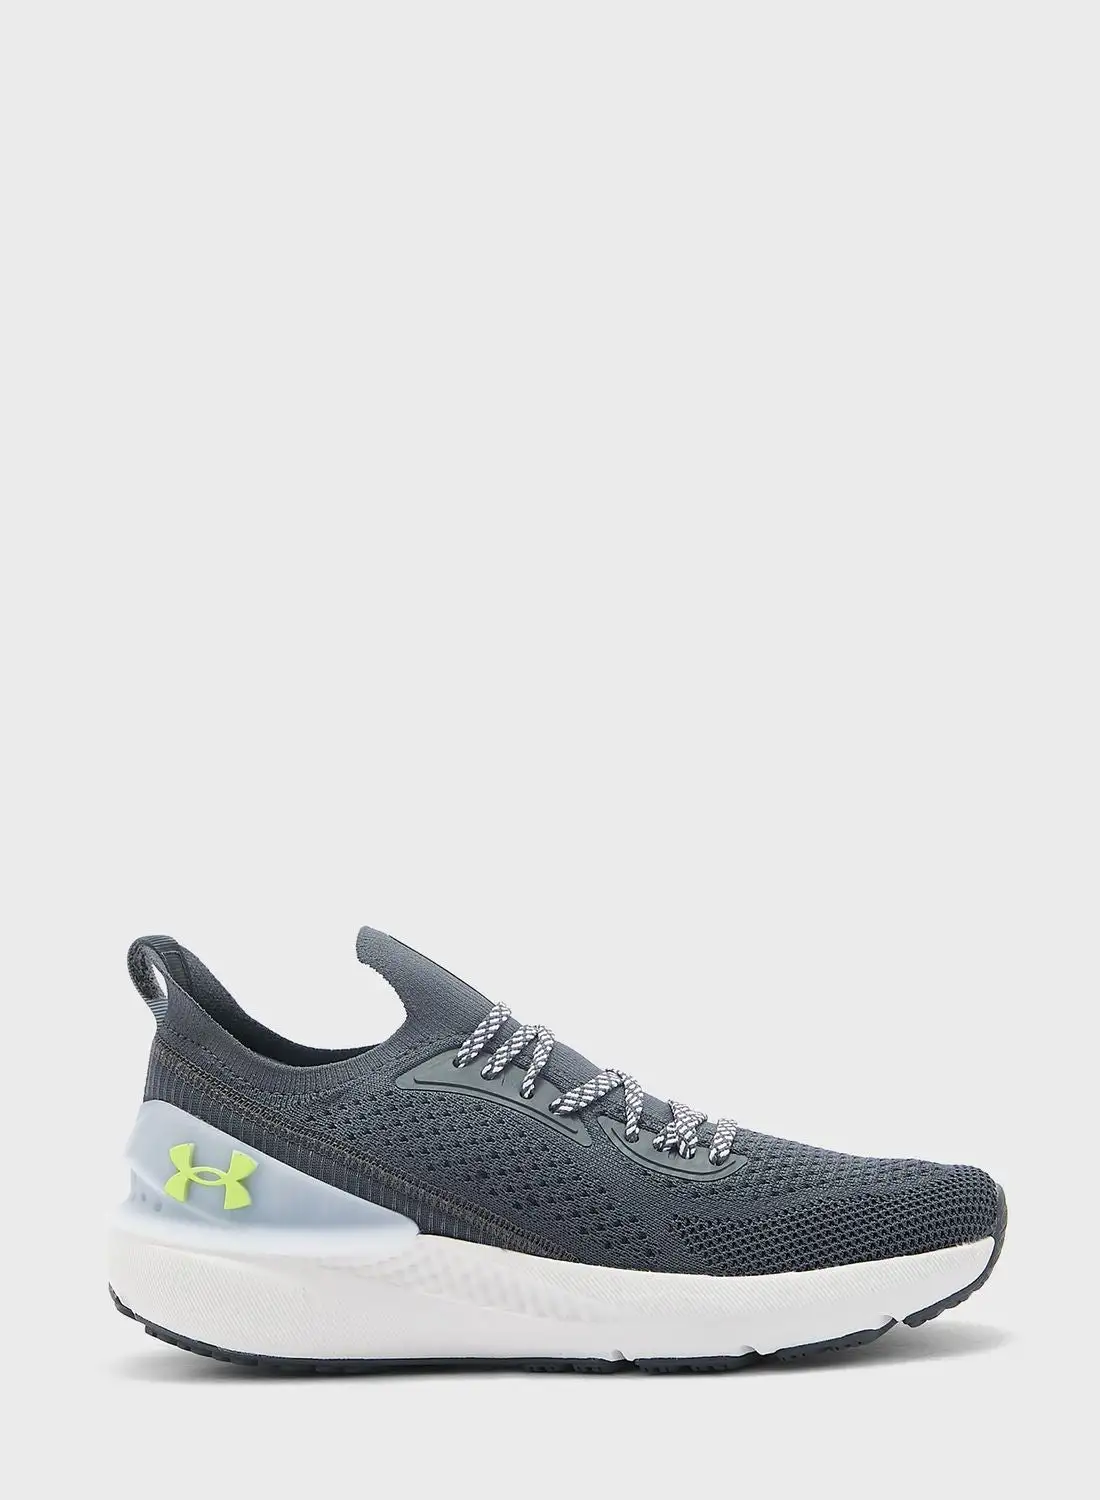 UNDER ARMOUR Shift Sneakers